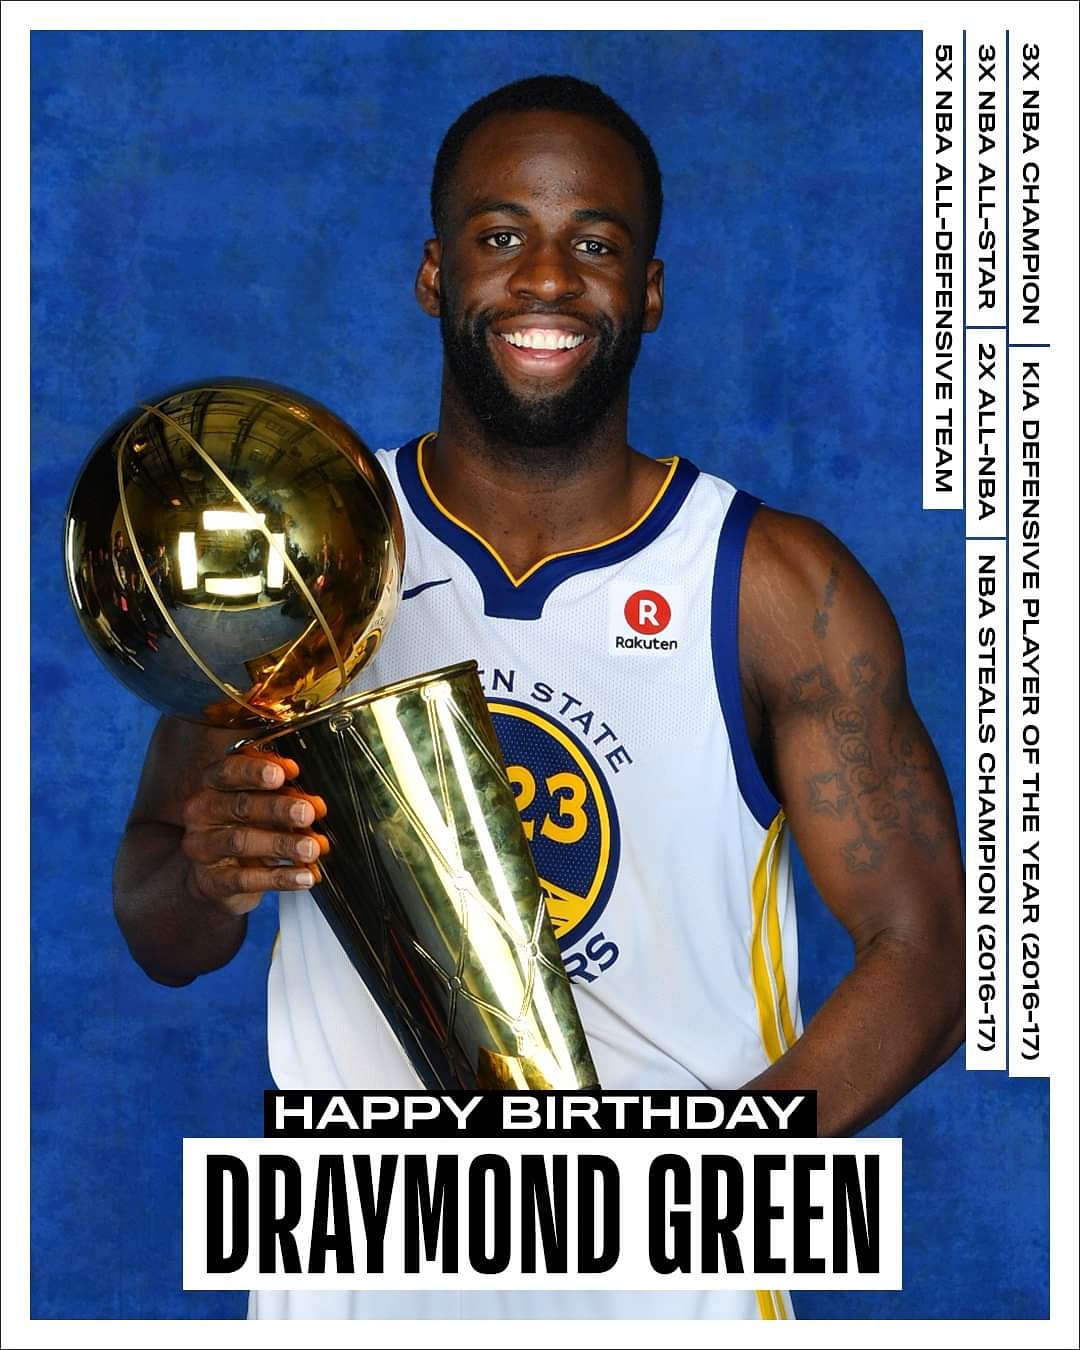 Join us in wishing Draymond Green of the Golden State Warriors a HAPPY 30TH BIRTHDAY!  